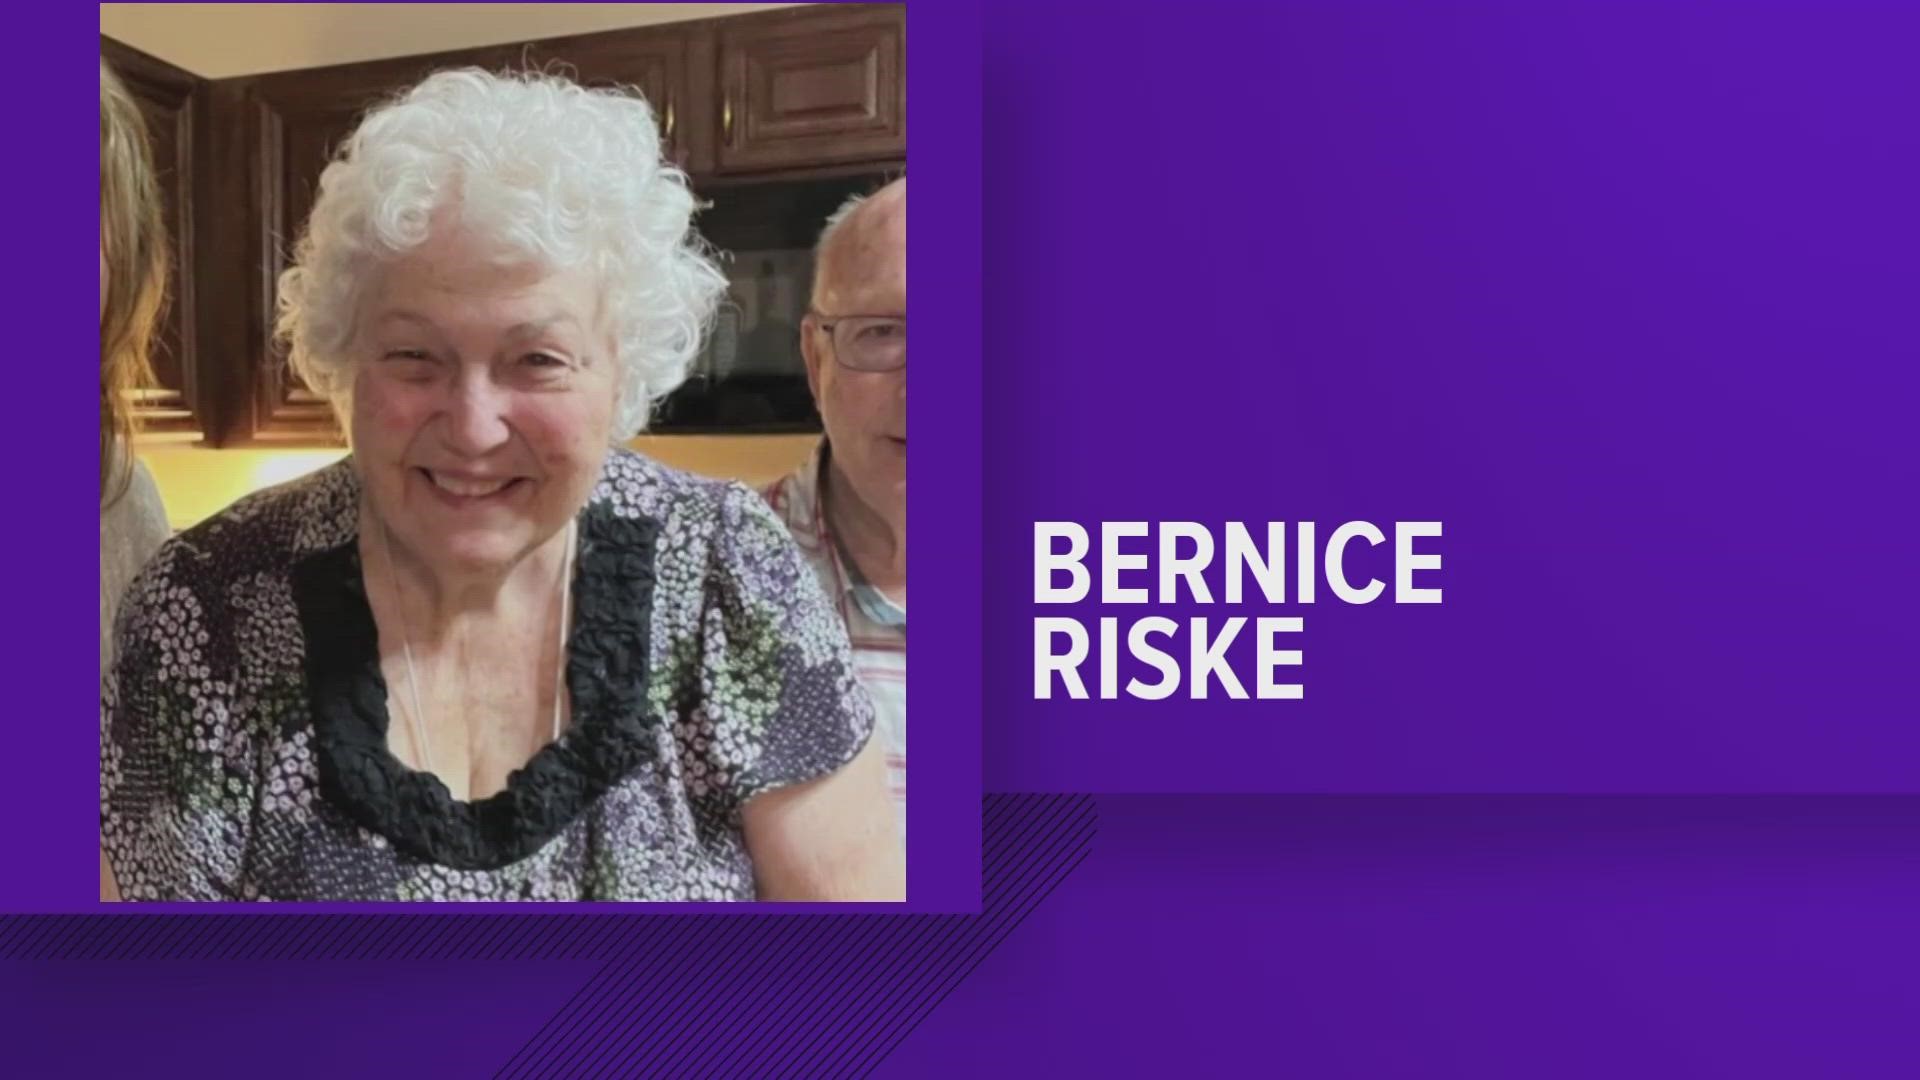 Knoxville Police said search and rescue officers from the department and Knox County Rescue found Bernice Riske and took her to the hospital.